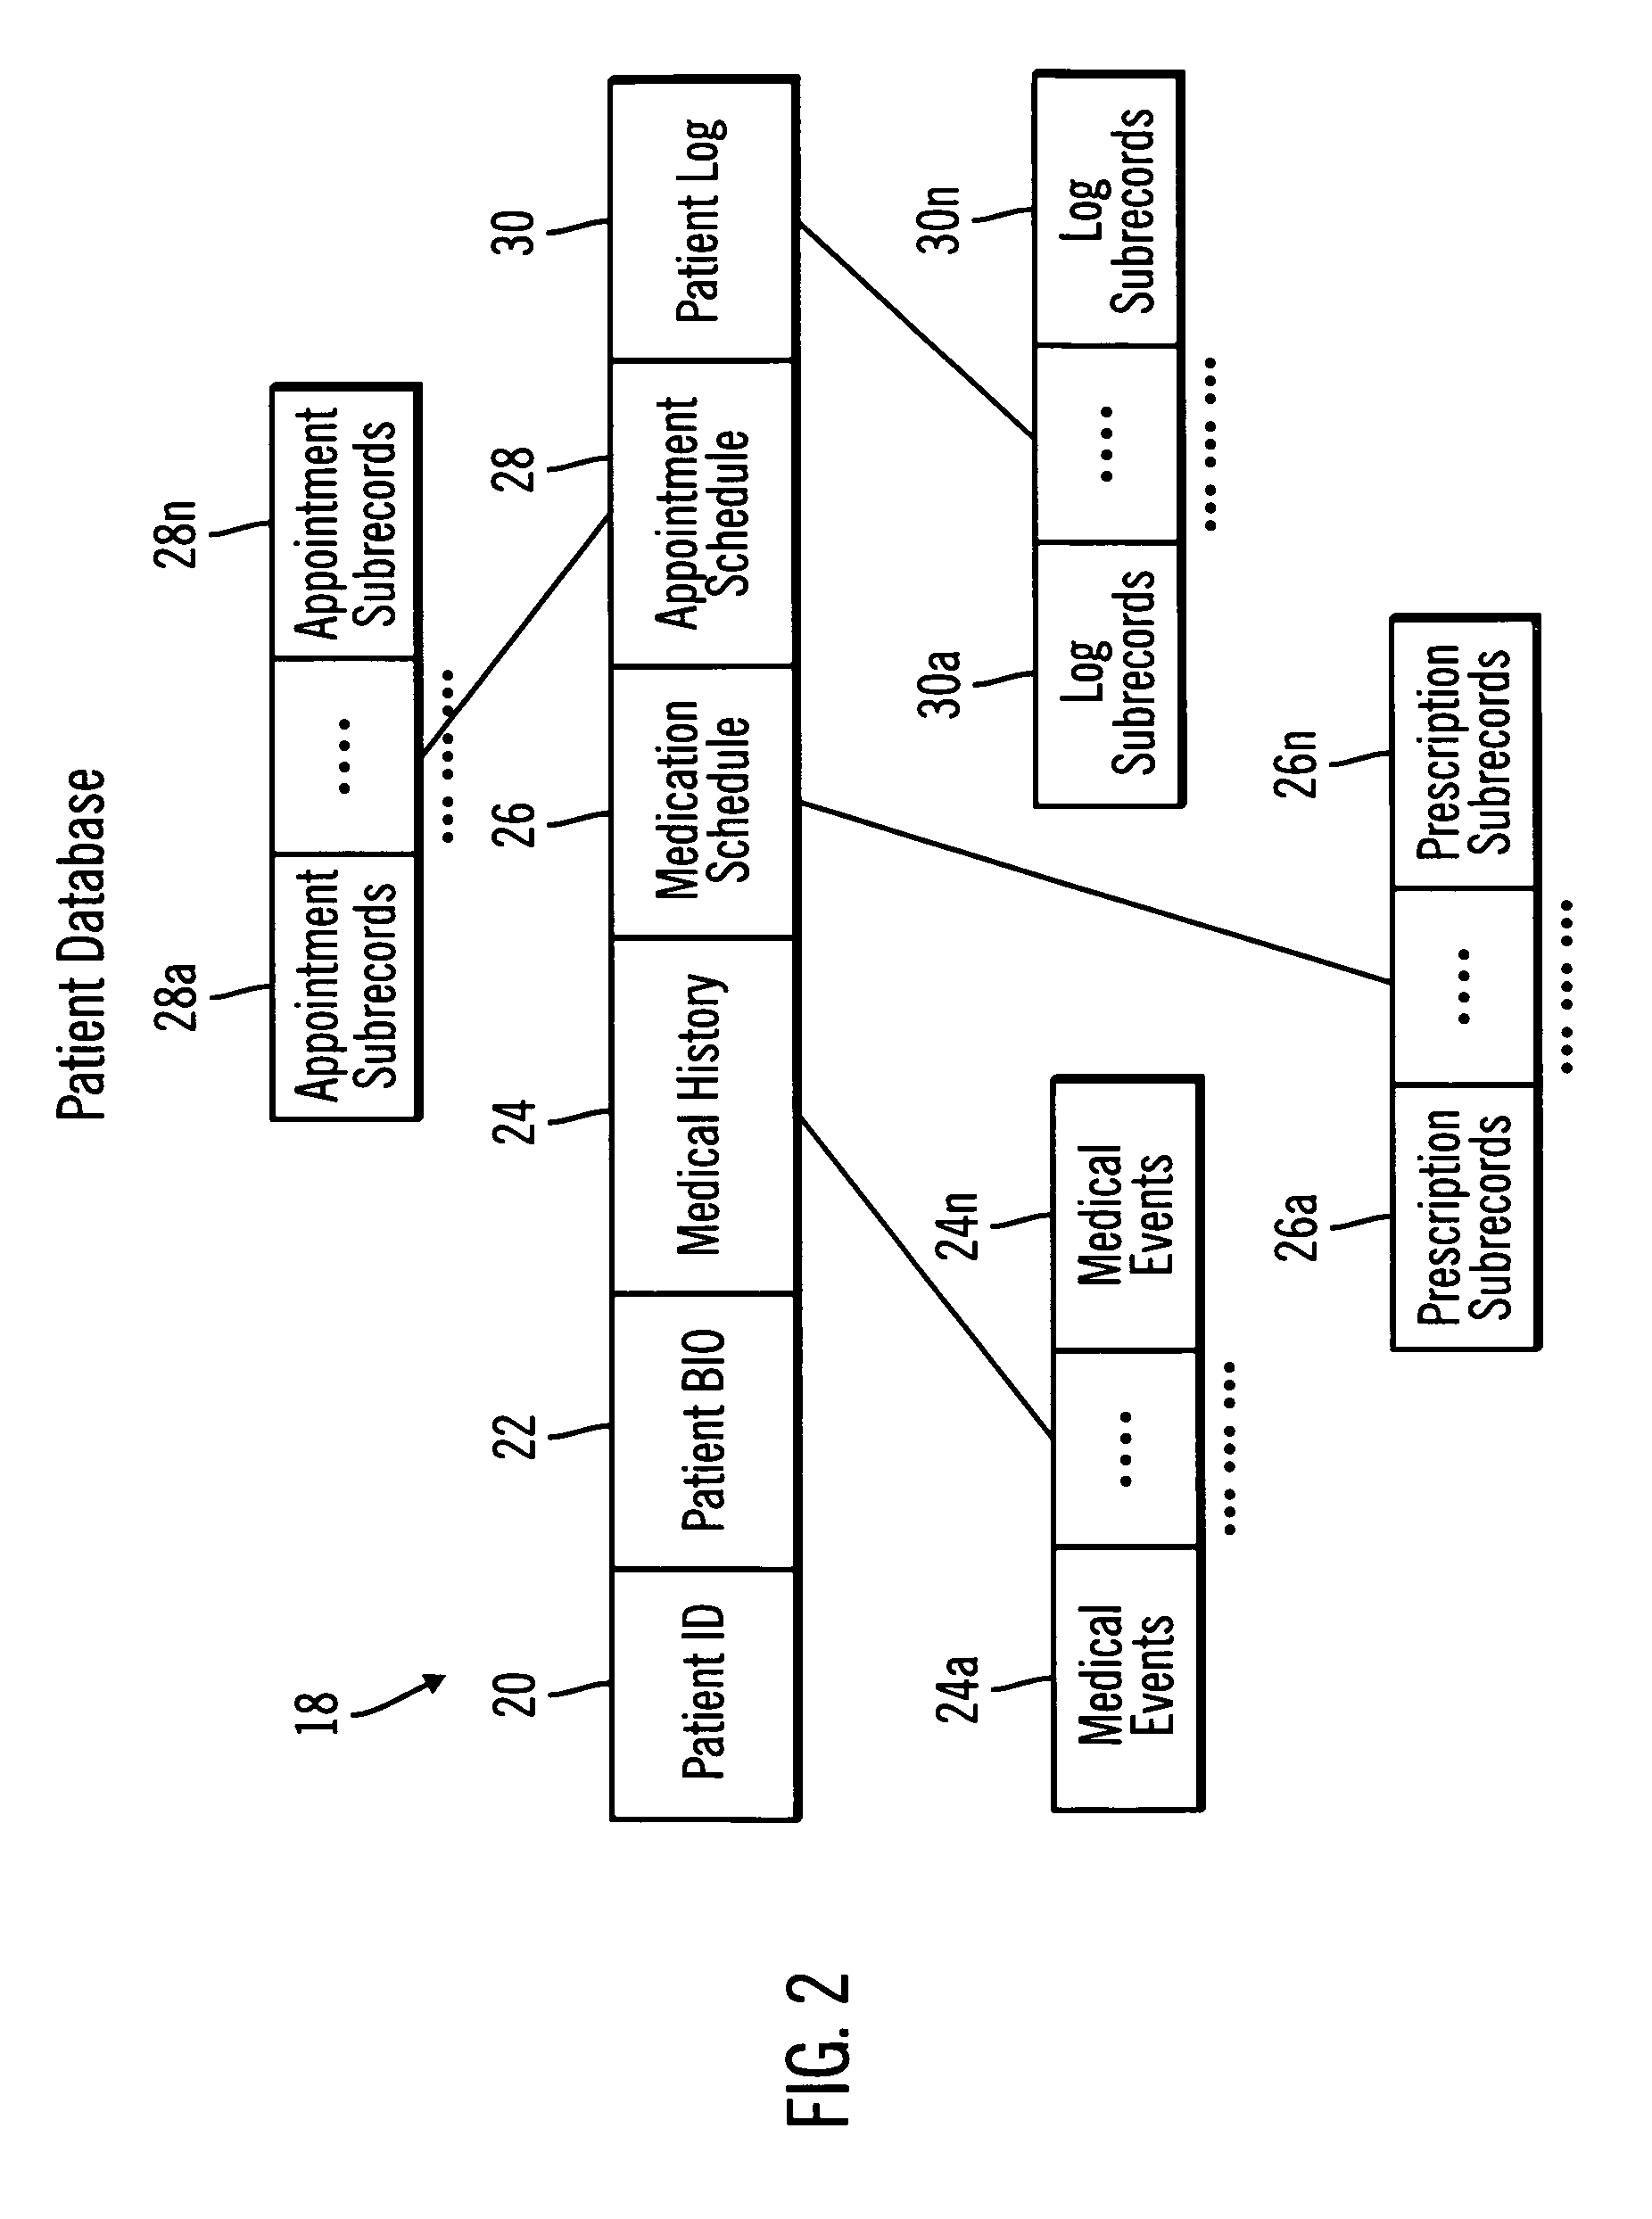 System and program for electronically maintaining medical information between patients and physicians